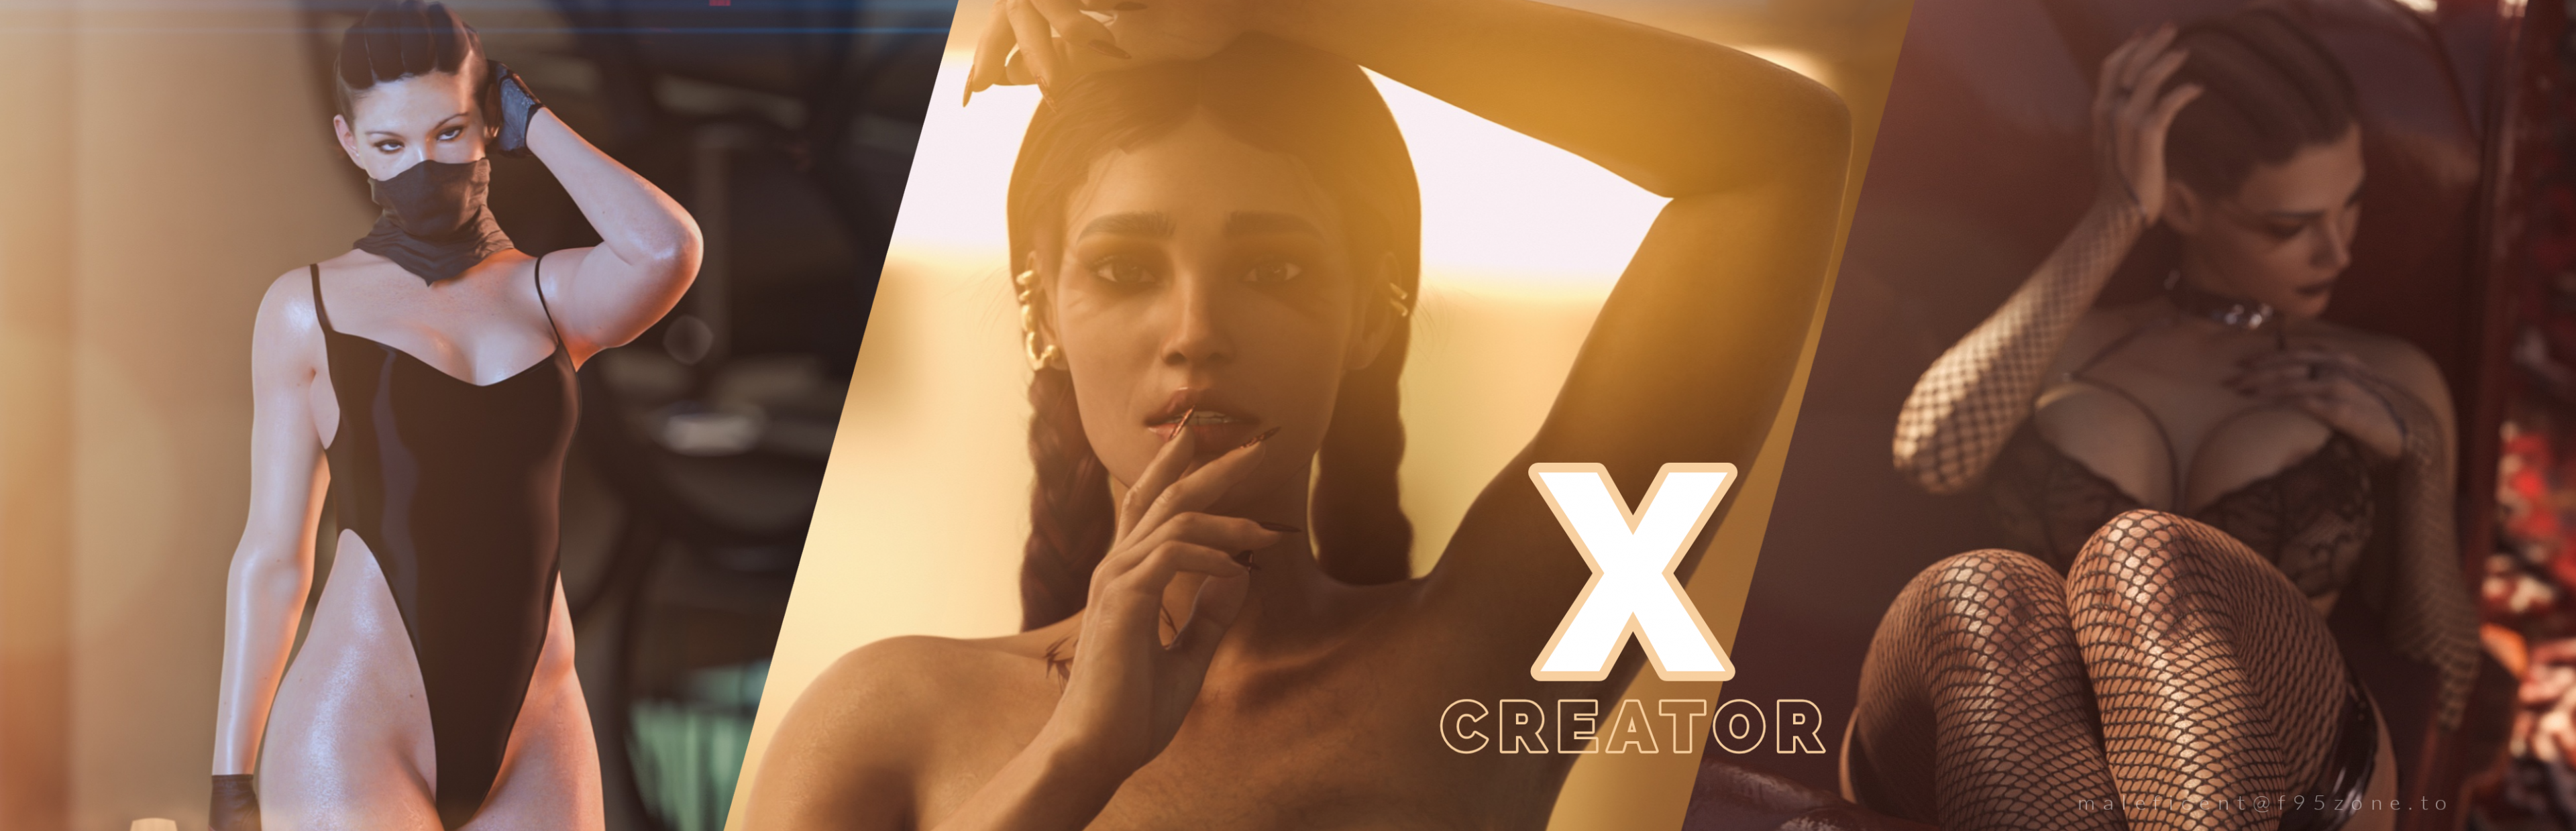 x-creator_custom_cover_by_maleficent.png